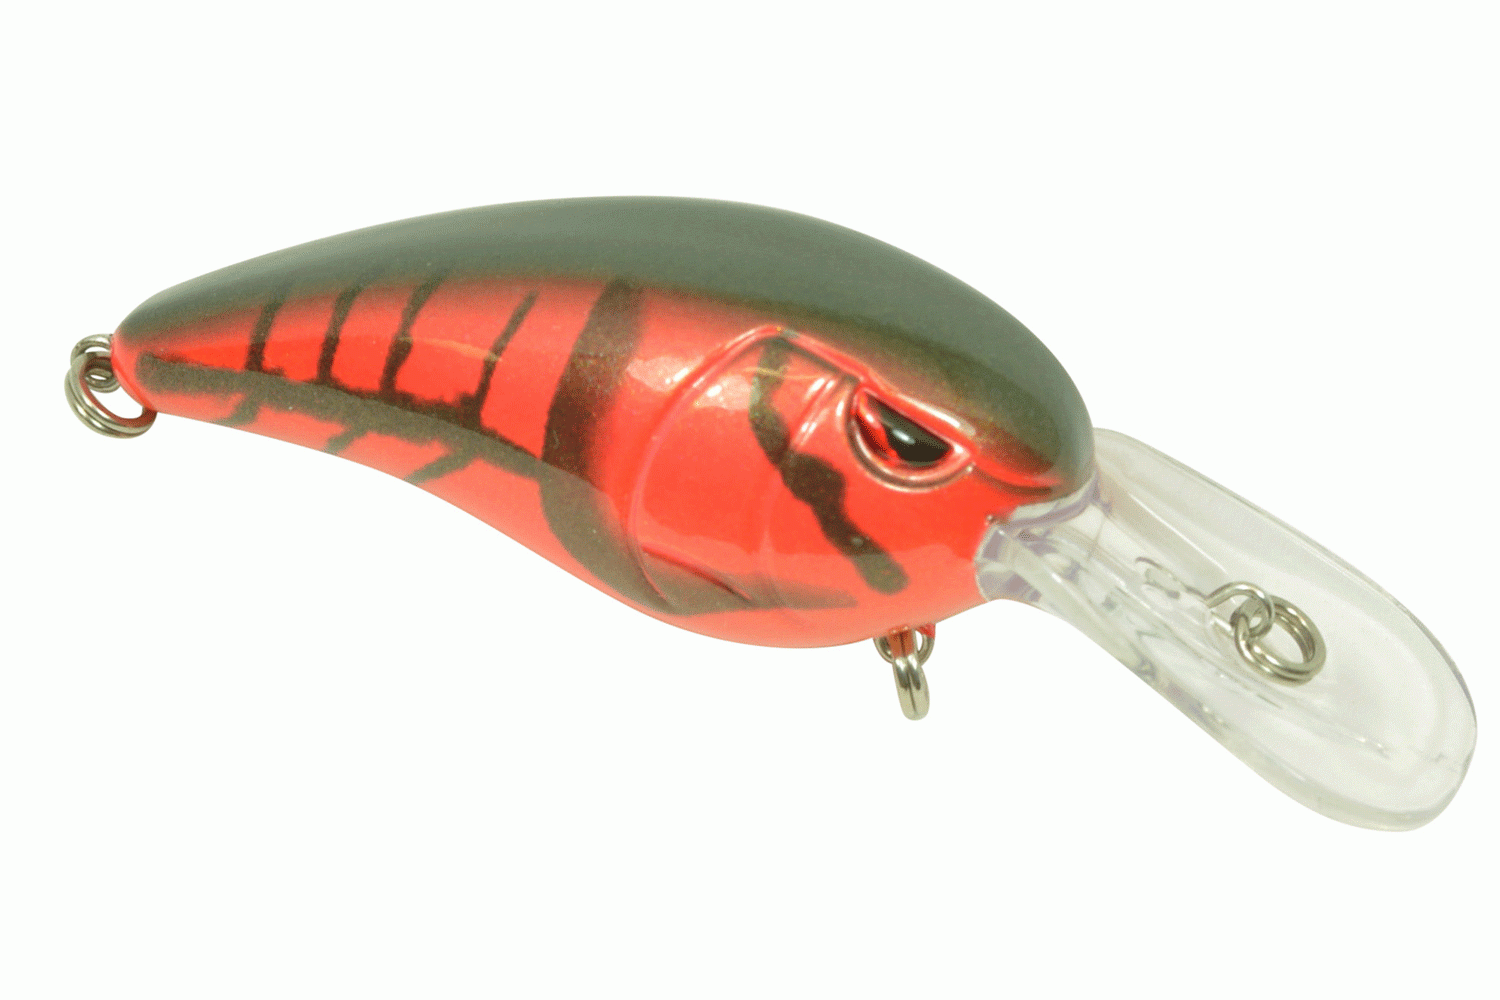 <p><b>Spro RKCrawler MD 55, $10.38</b></p> The RkCrawler MD 55 features all the benefits of the RkCrawler 55, but with a shallower dive angle. This bait will be able to come through the rocks more like a squarebill crankbait deflecting off of the cover drawing more strikes. When the fish are shallower then 7 feet, the RkCrawler MD 55 should be your go-to.<br> <a href=